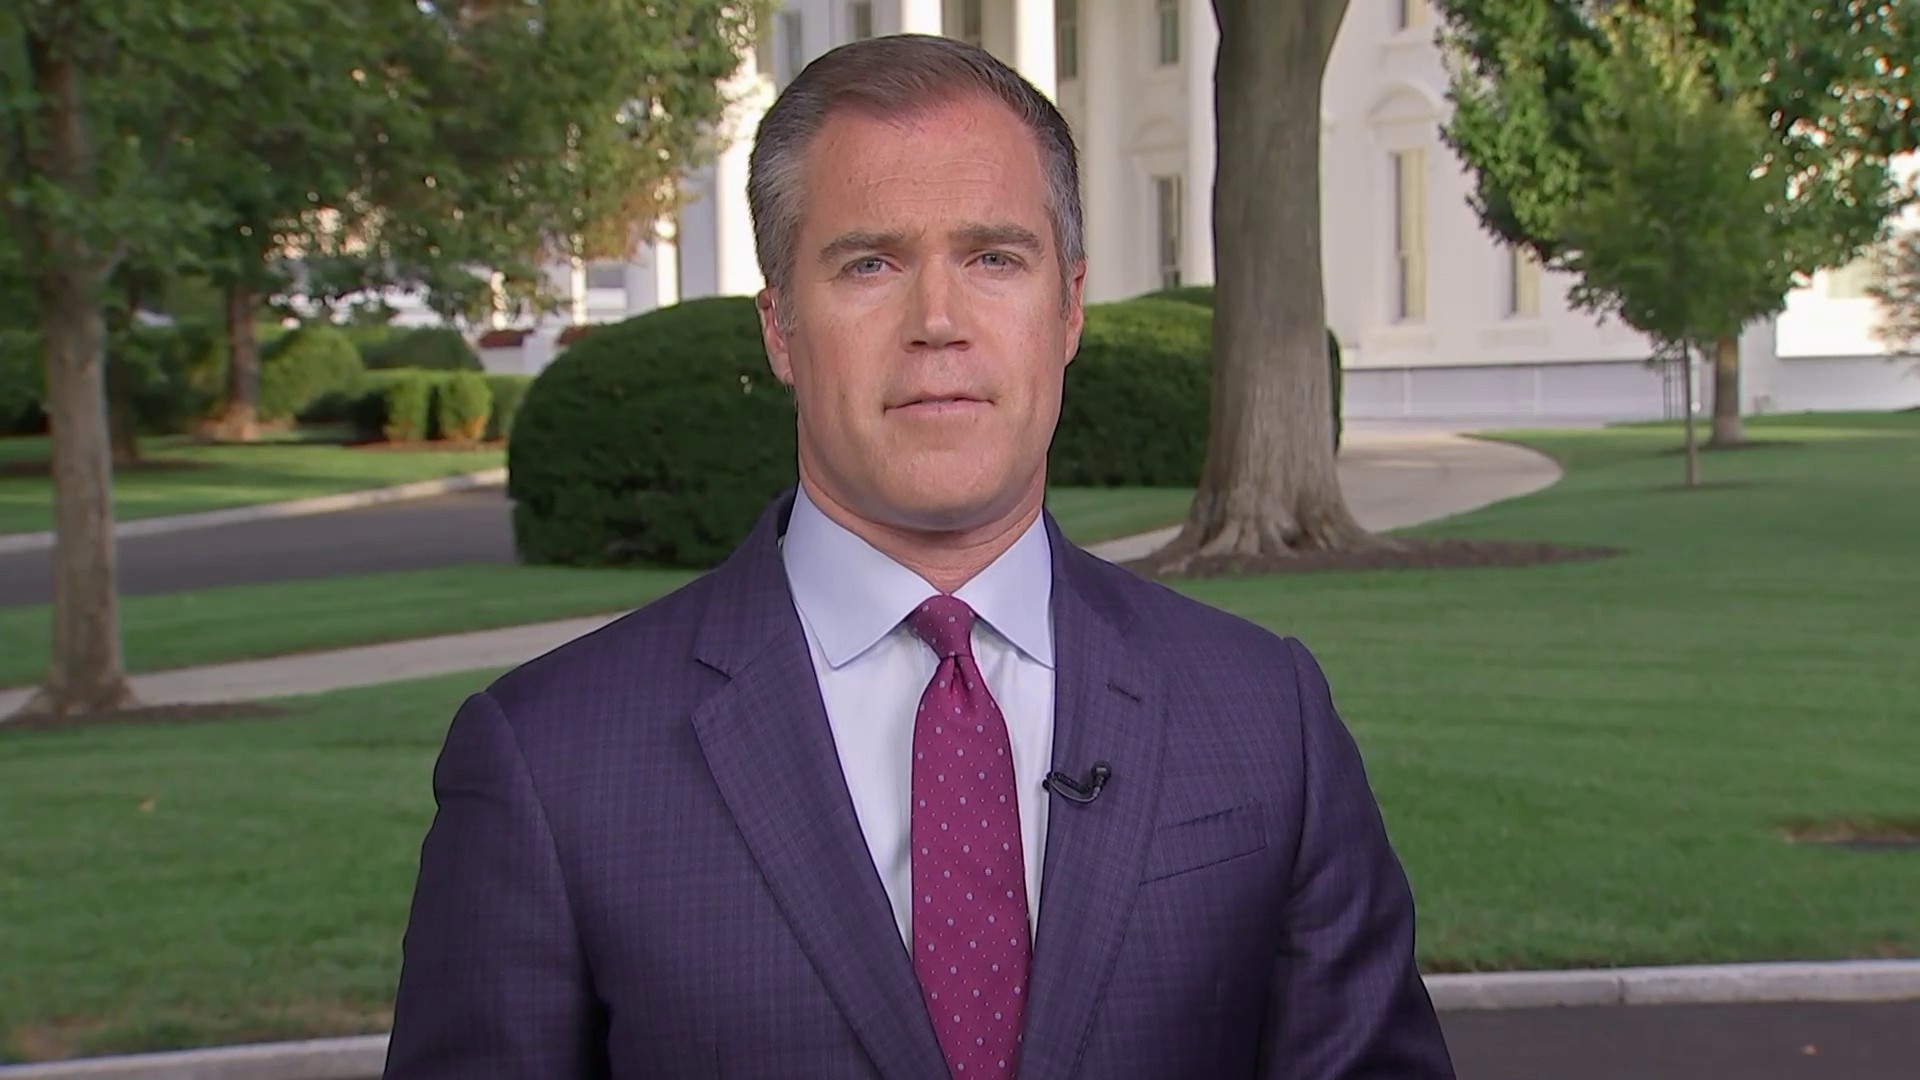 White House and Republicans react to Lester Holt’s exclusive interview with Iranian President